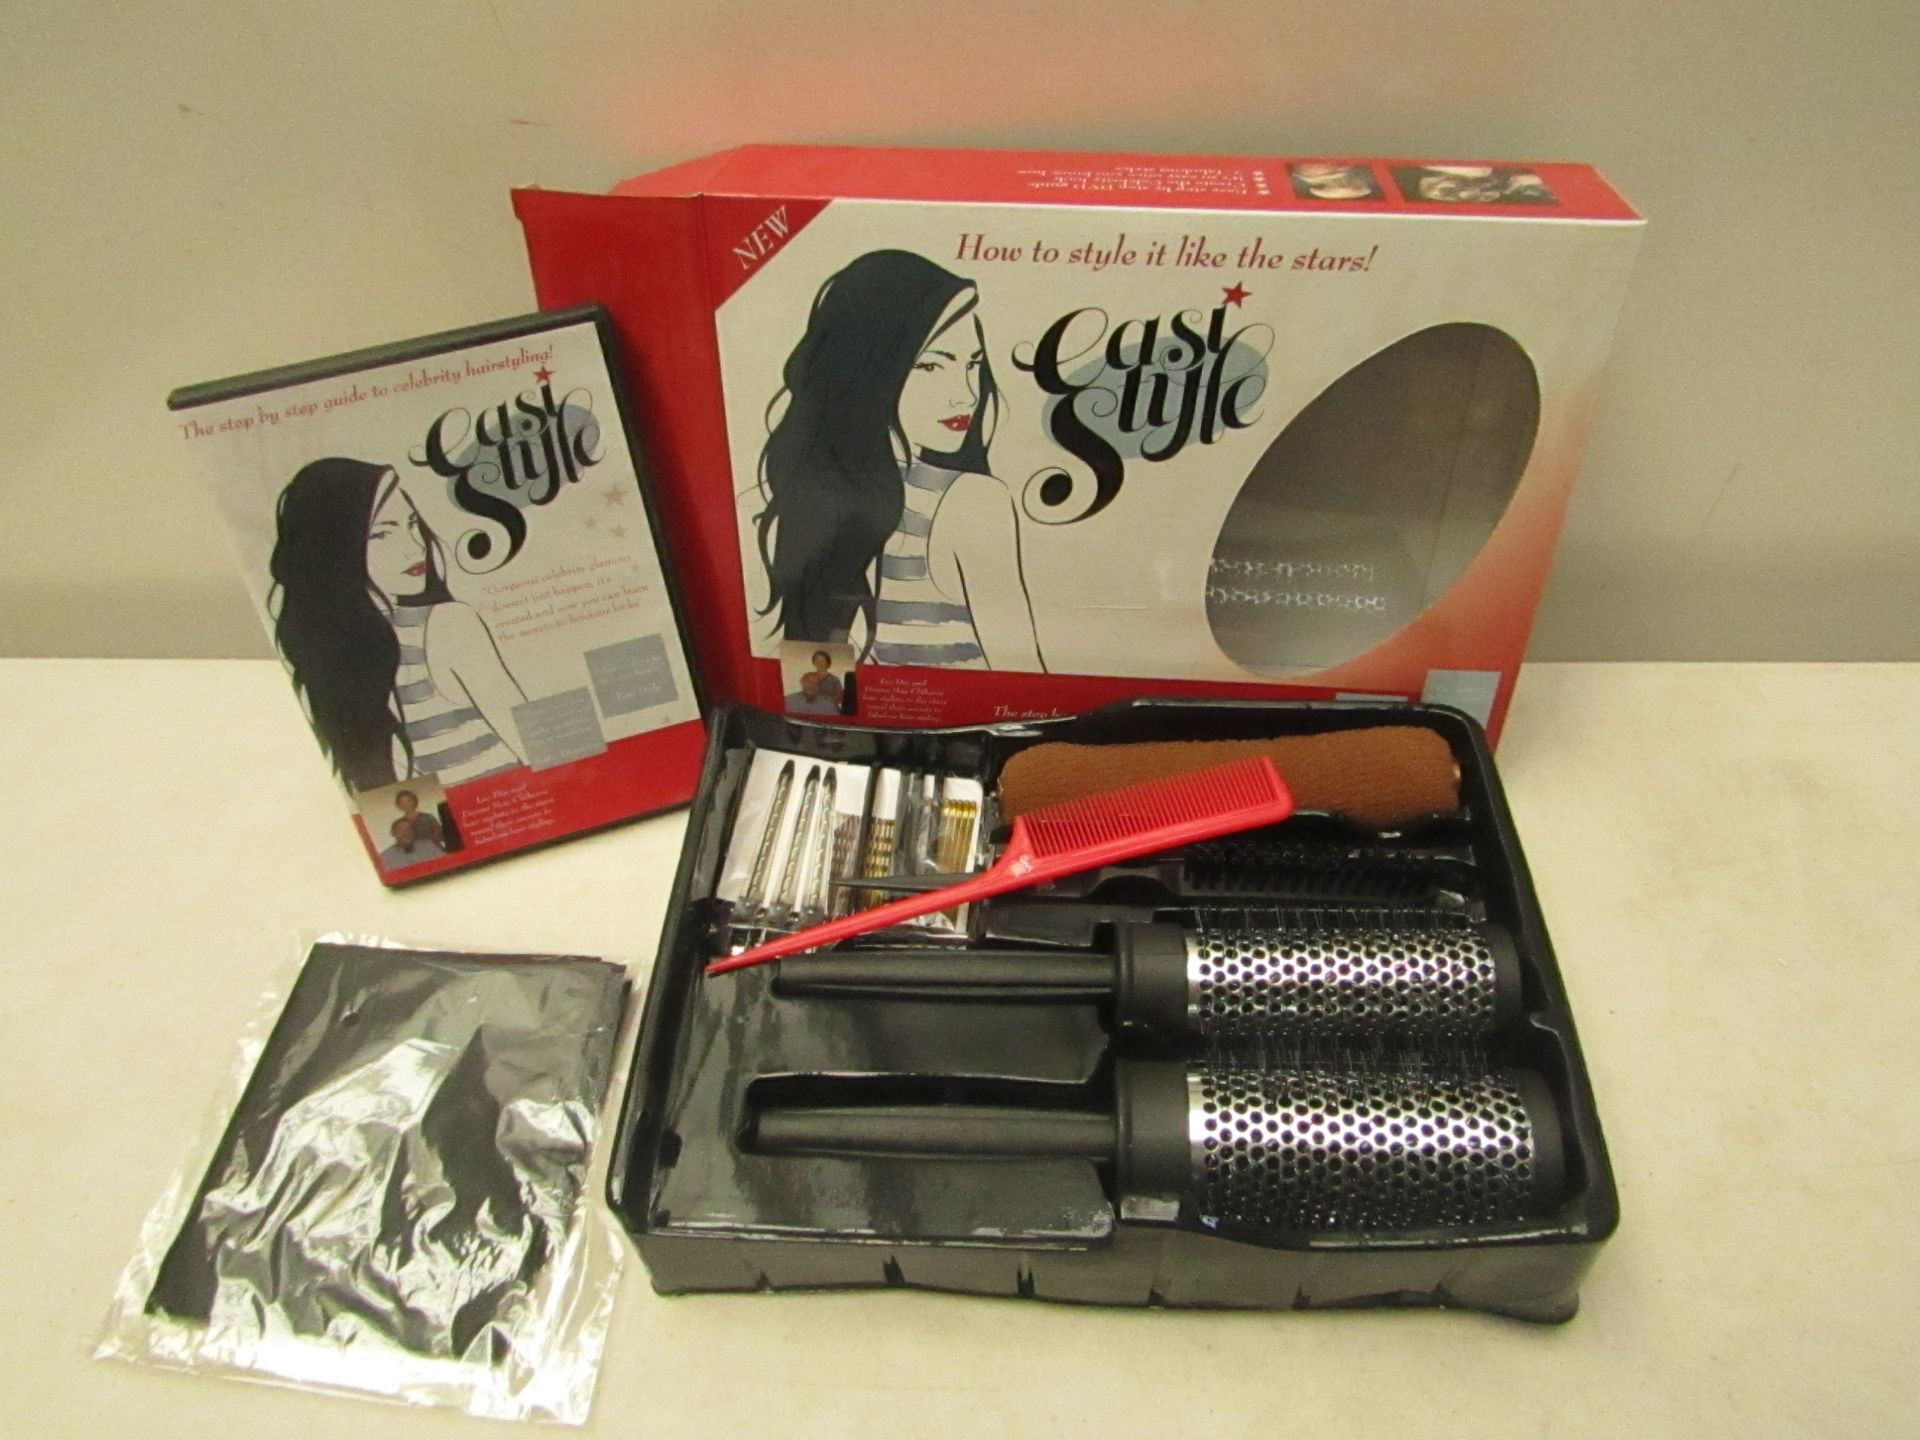 Easistyle hair styling set, new and boxed. Contains;  Celeb styling DVD, Large curling brush,